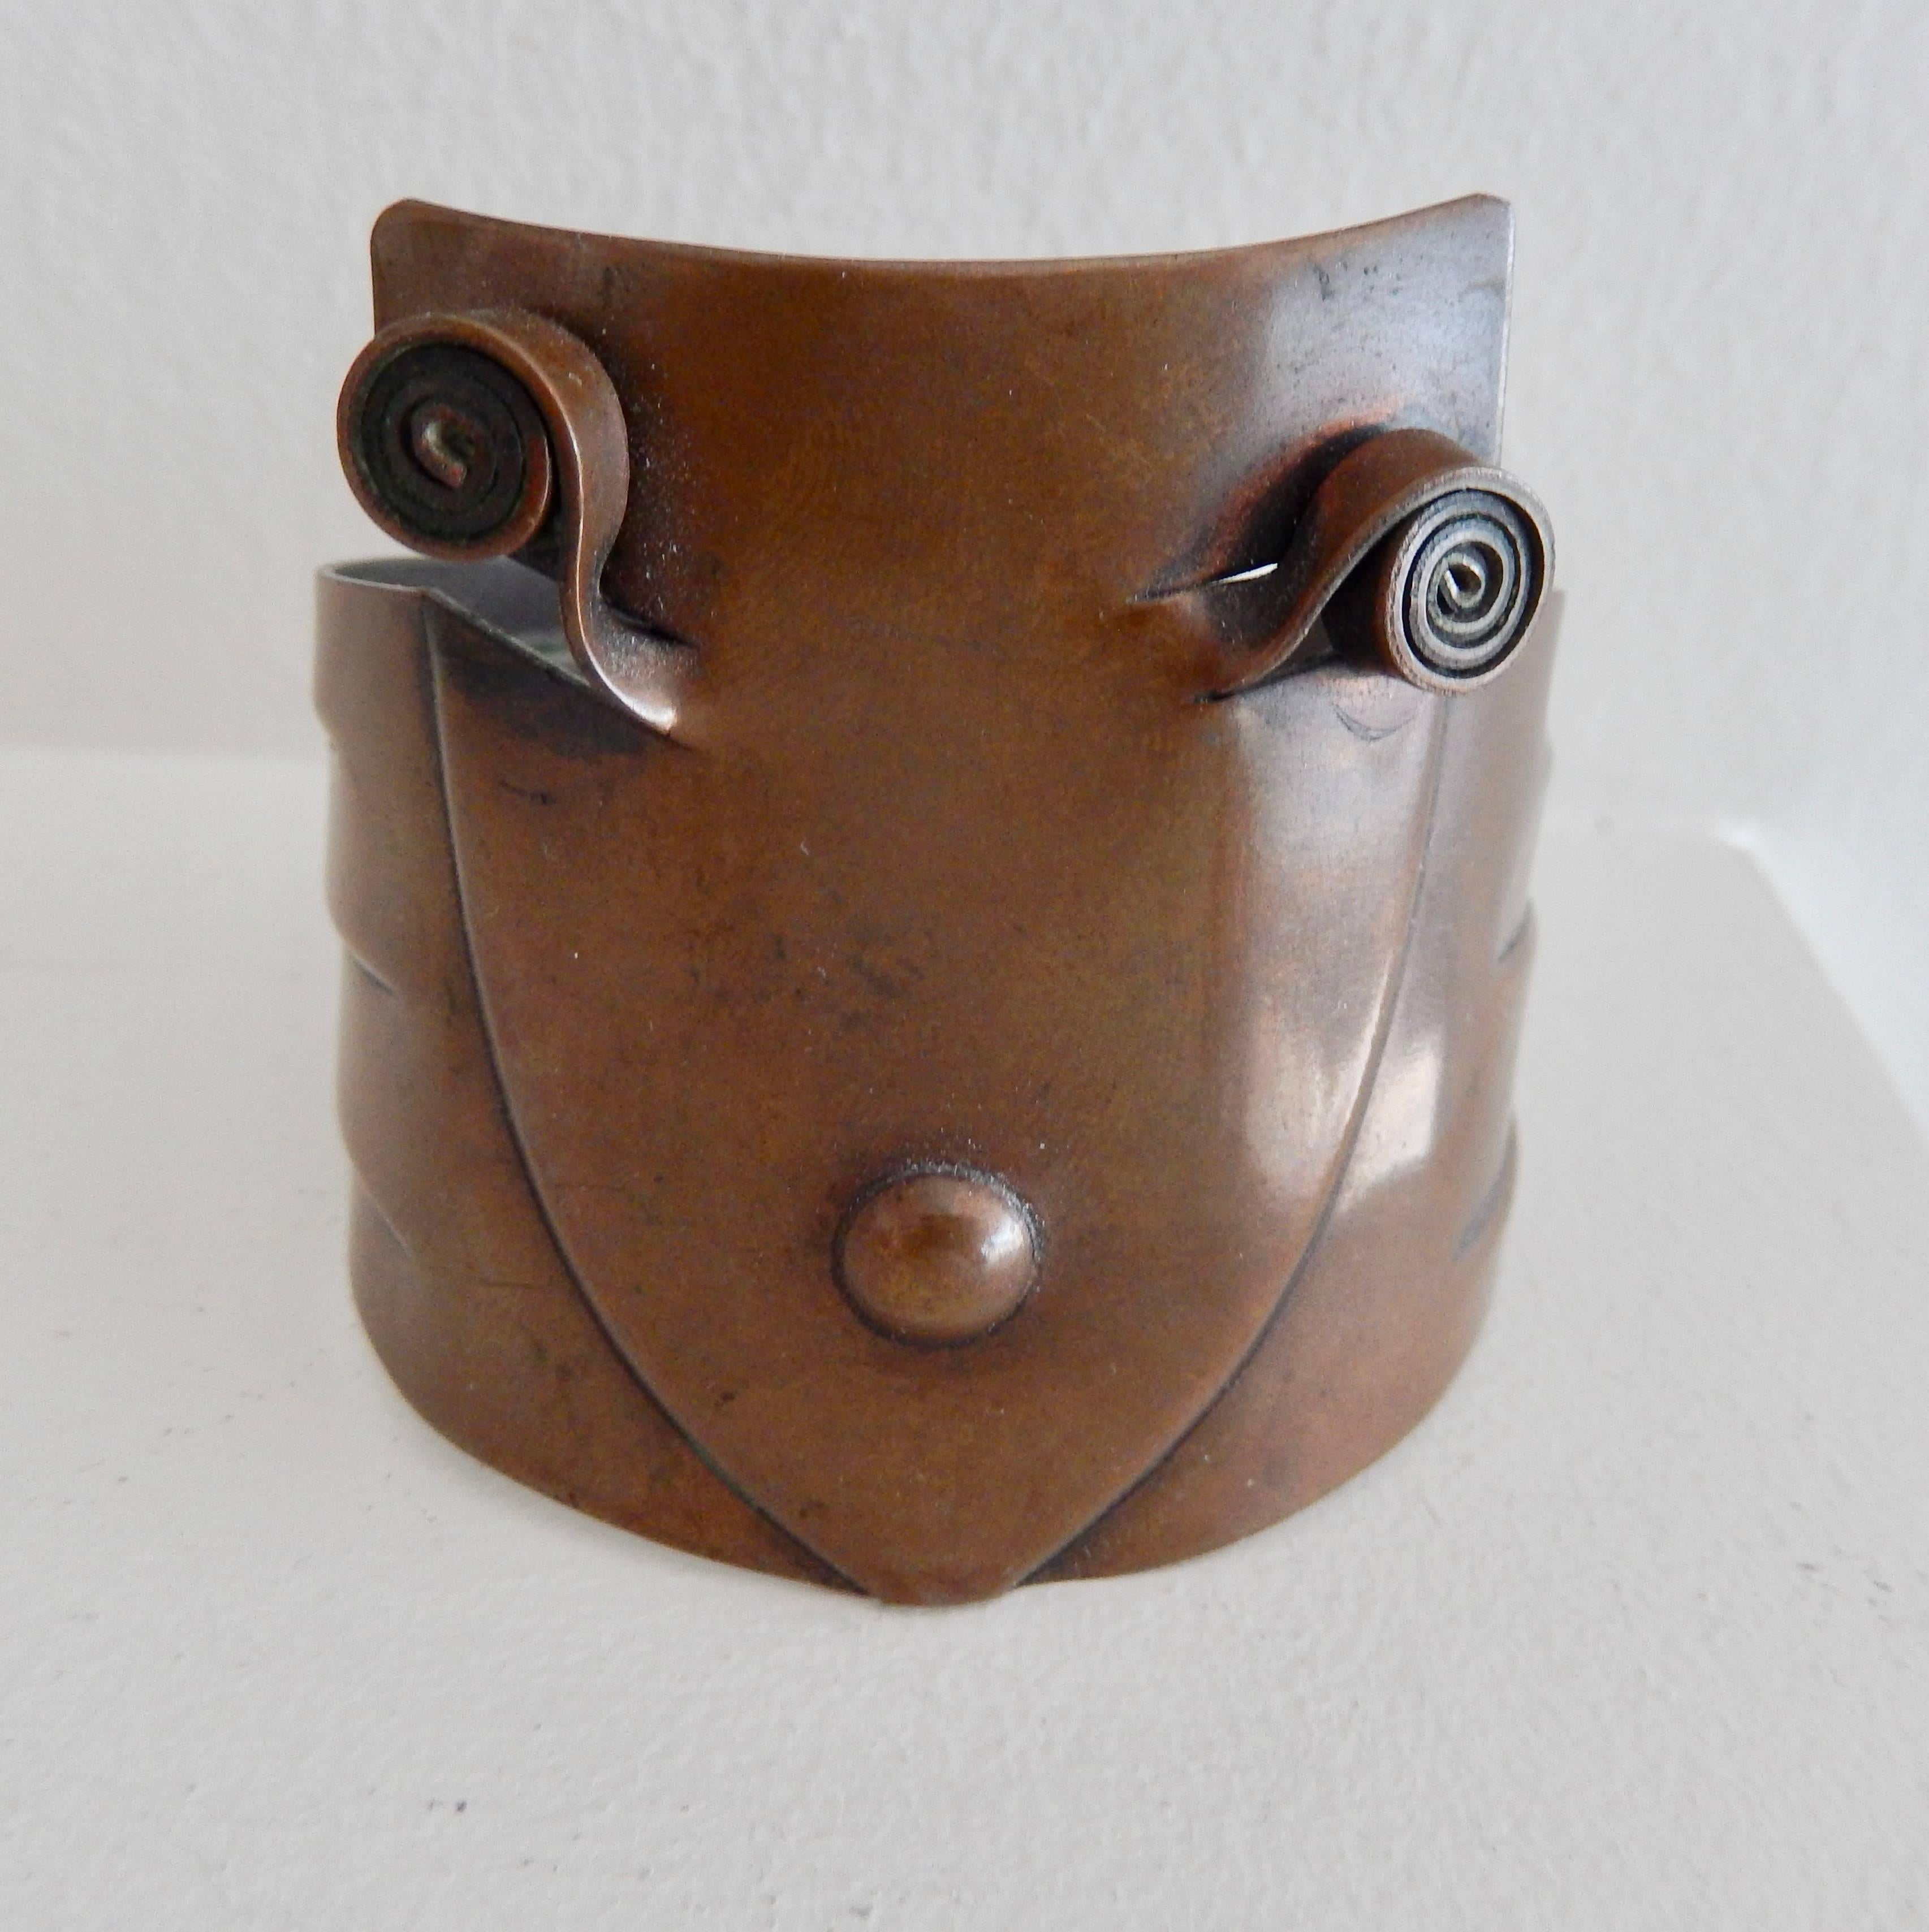 A unique, handwrought copper cuff by the master metalsmith Francisco Rebajes (1907-1990).  A striking example of postwar American craft--a collector's piece. Signed.

Rebajes, born in the Dominican Republic, went to New York in the 1920s and in 1940